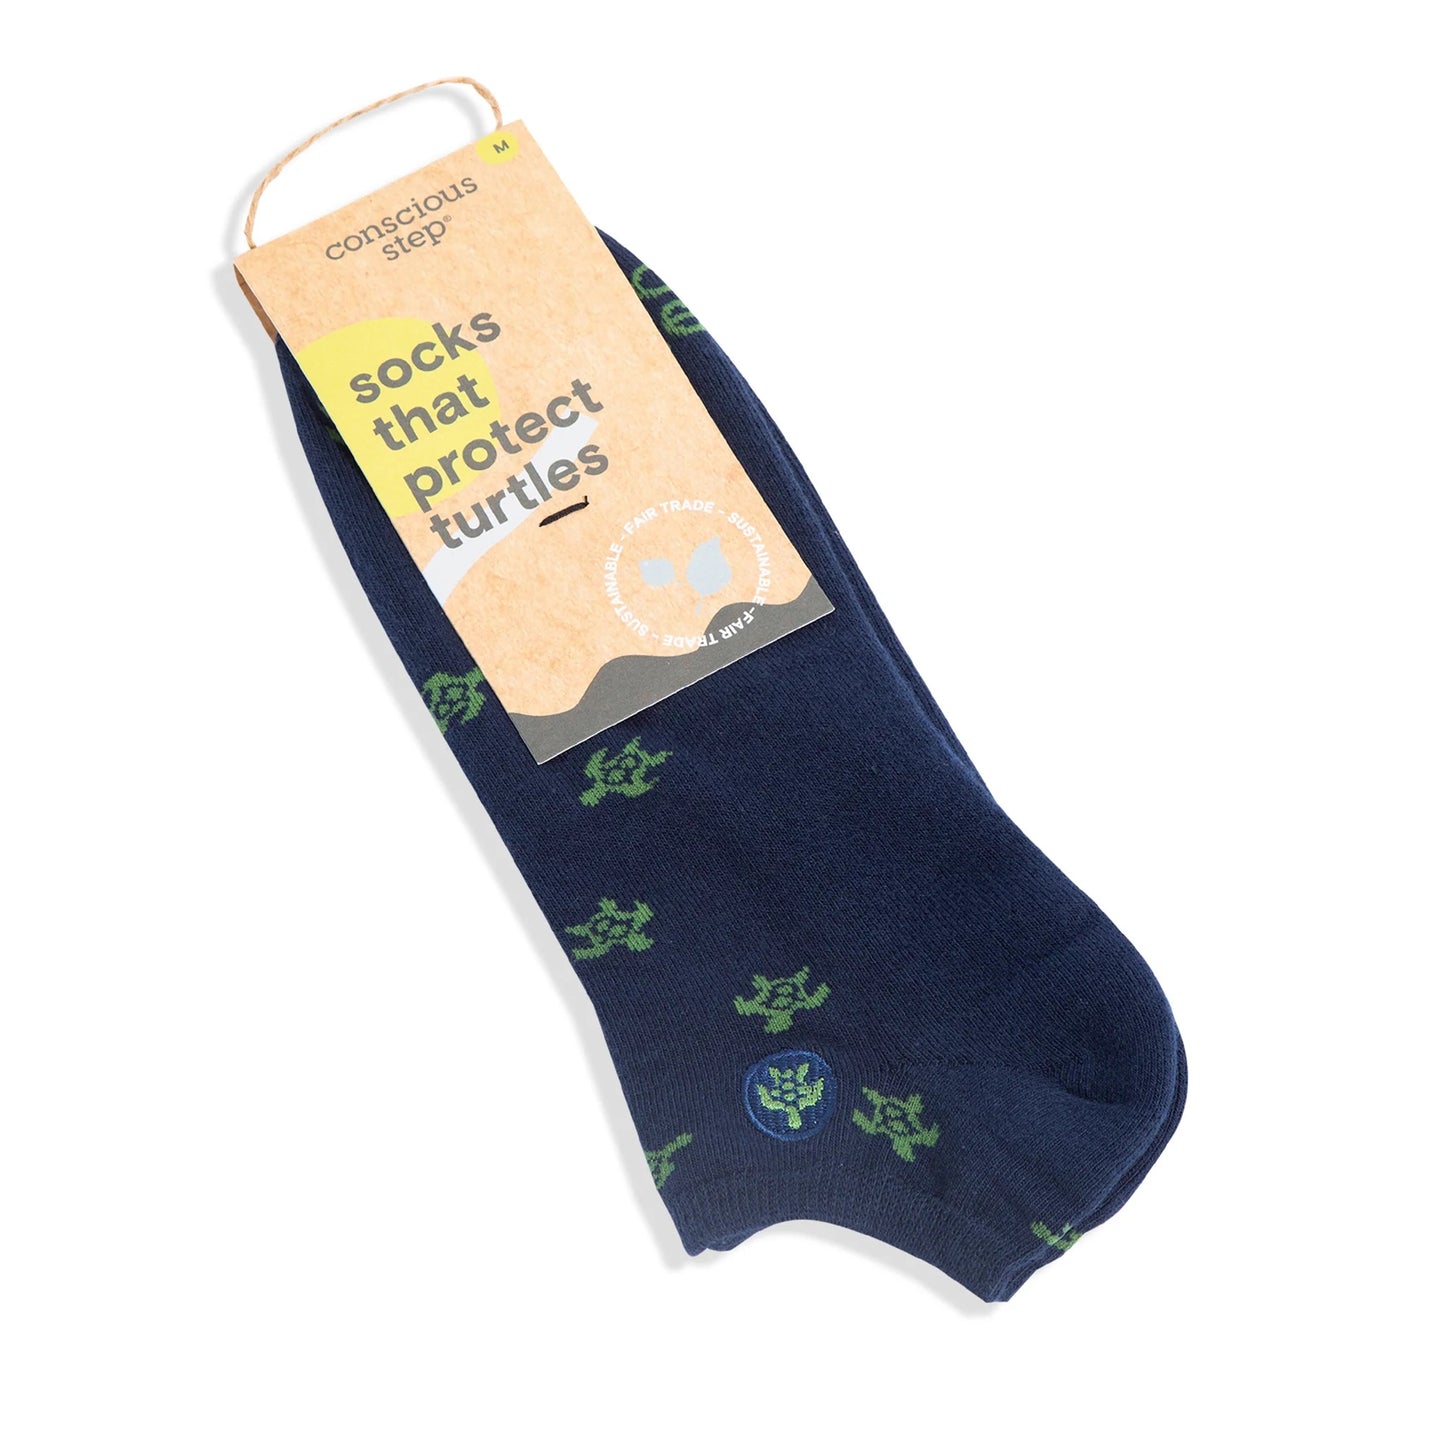 Conscious Step, Ankle Socks That Protect Turtles - Navy Turtles - Boutique Dandelion